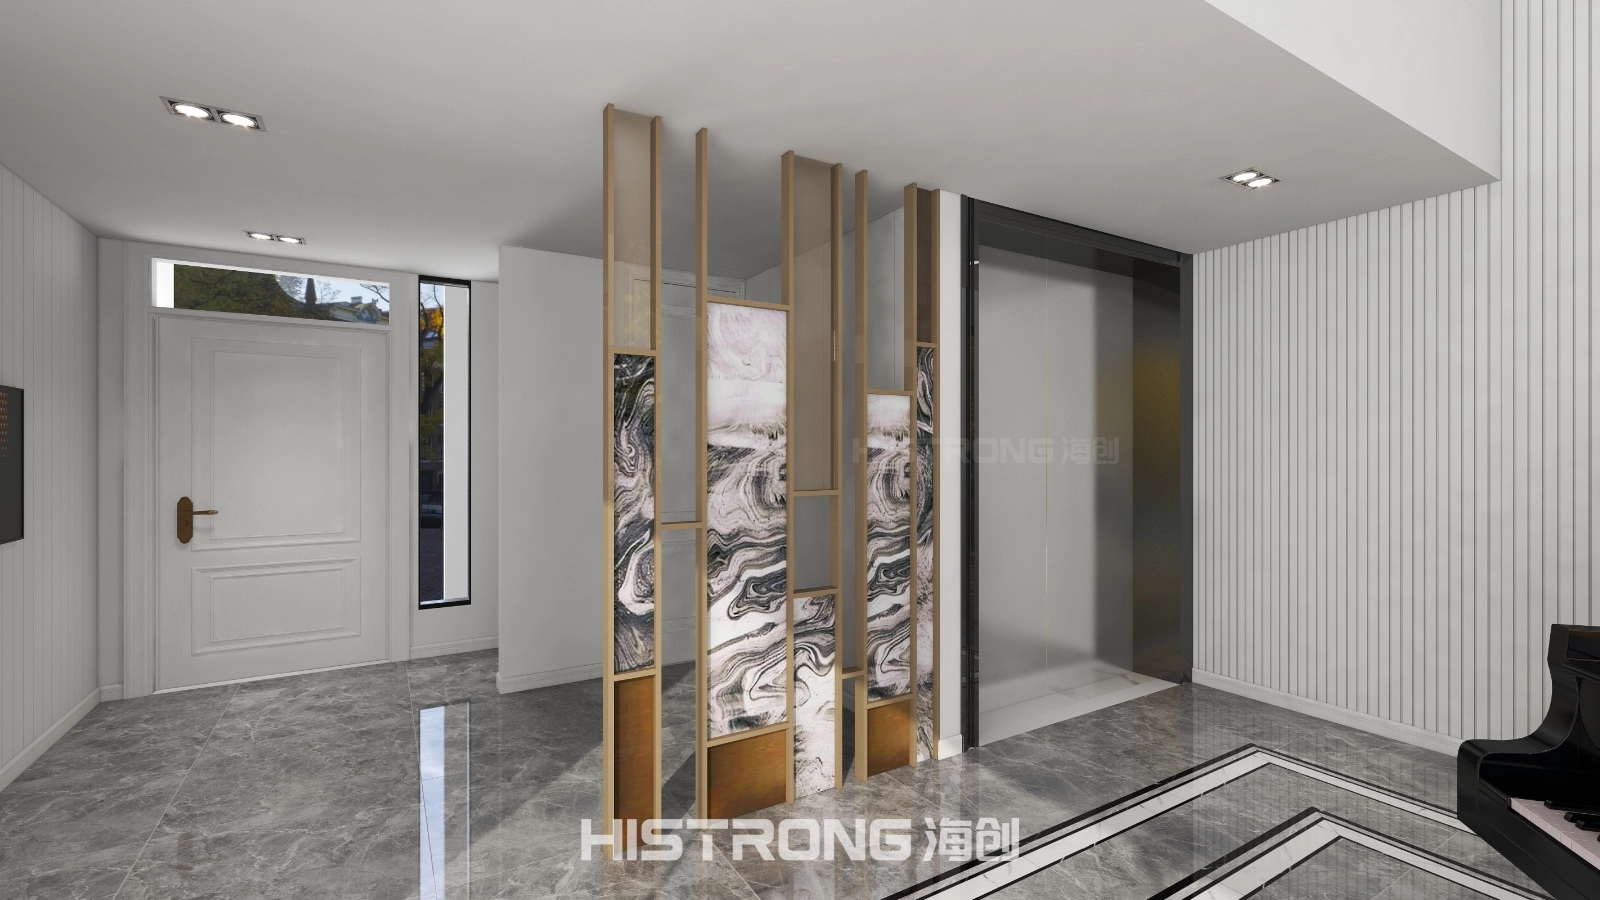 Living Area, Piano Area, Marble Feature Partition, Bamboo Fibre Panel Feature Wall, Bamboo Fibre Fluted Panel, Living Feature Wall, Mirror Feature Wall